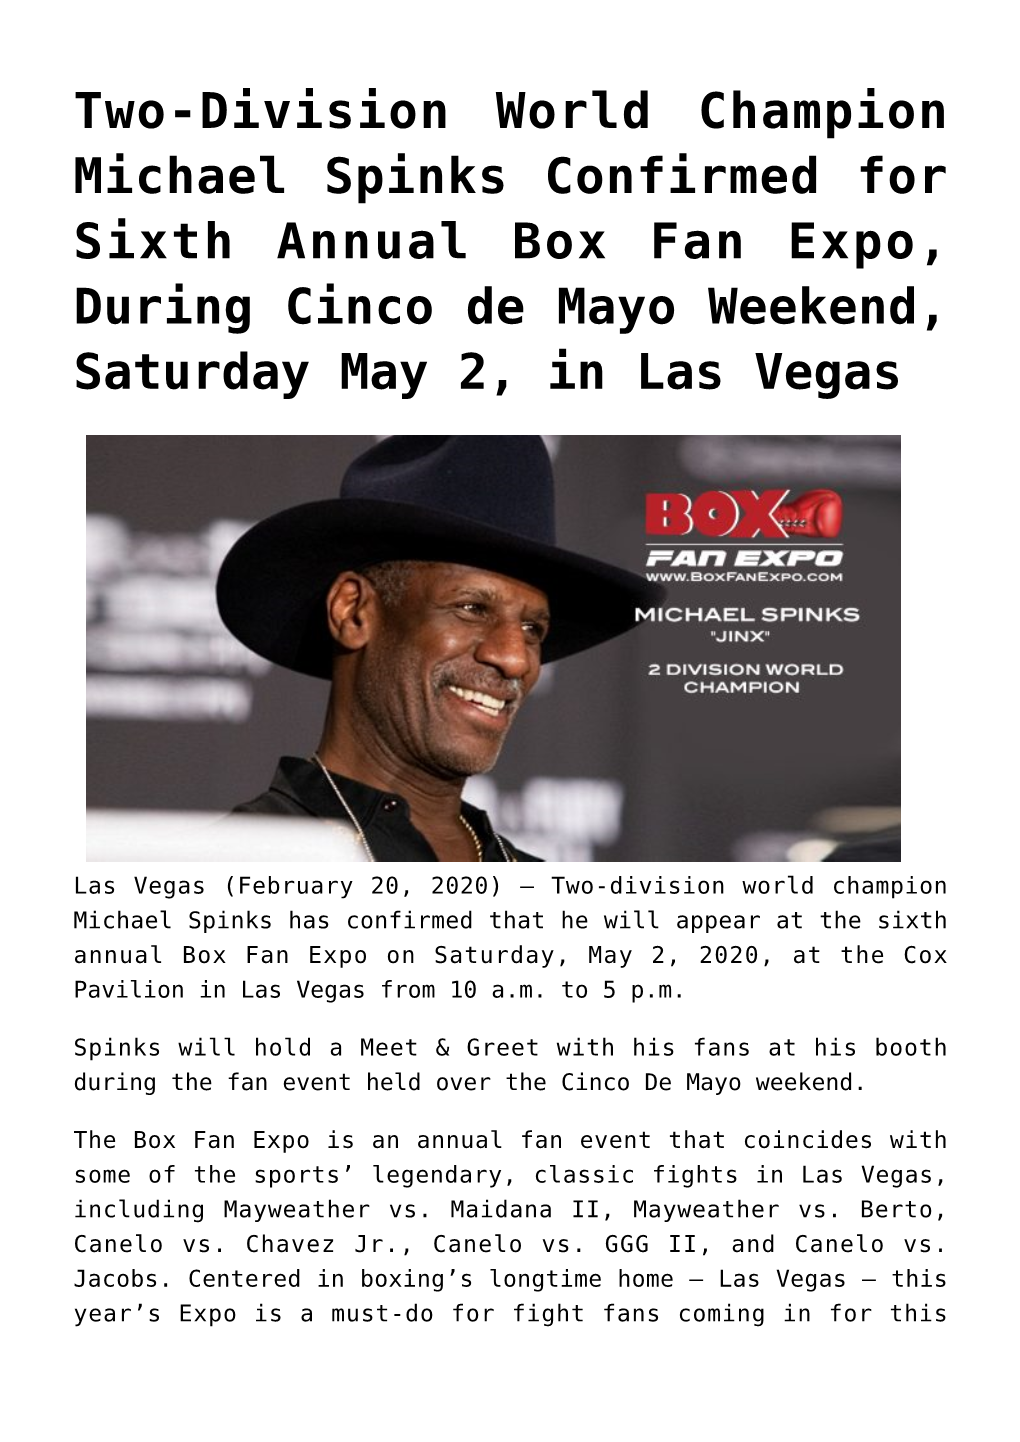 Two-Division World Champion Michael Spinks Confirmed for Sixth Annual Box Fan Expo, During Cinco De Mayo Weekend, Saturday May 2, in Las Vegas